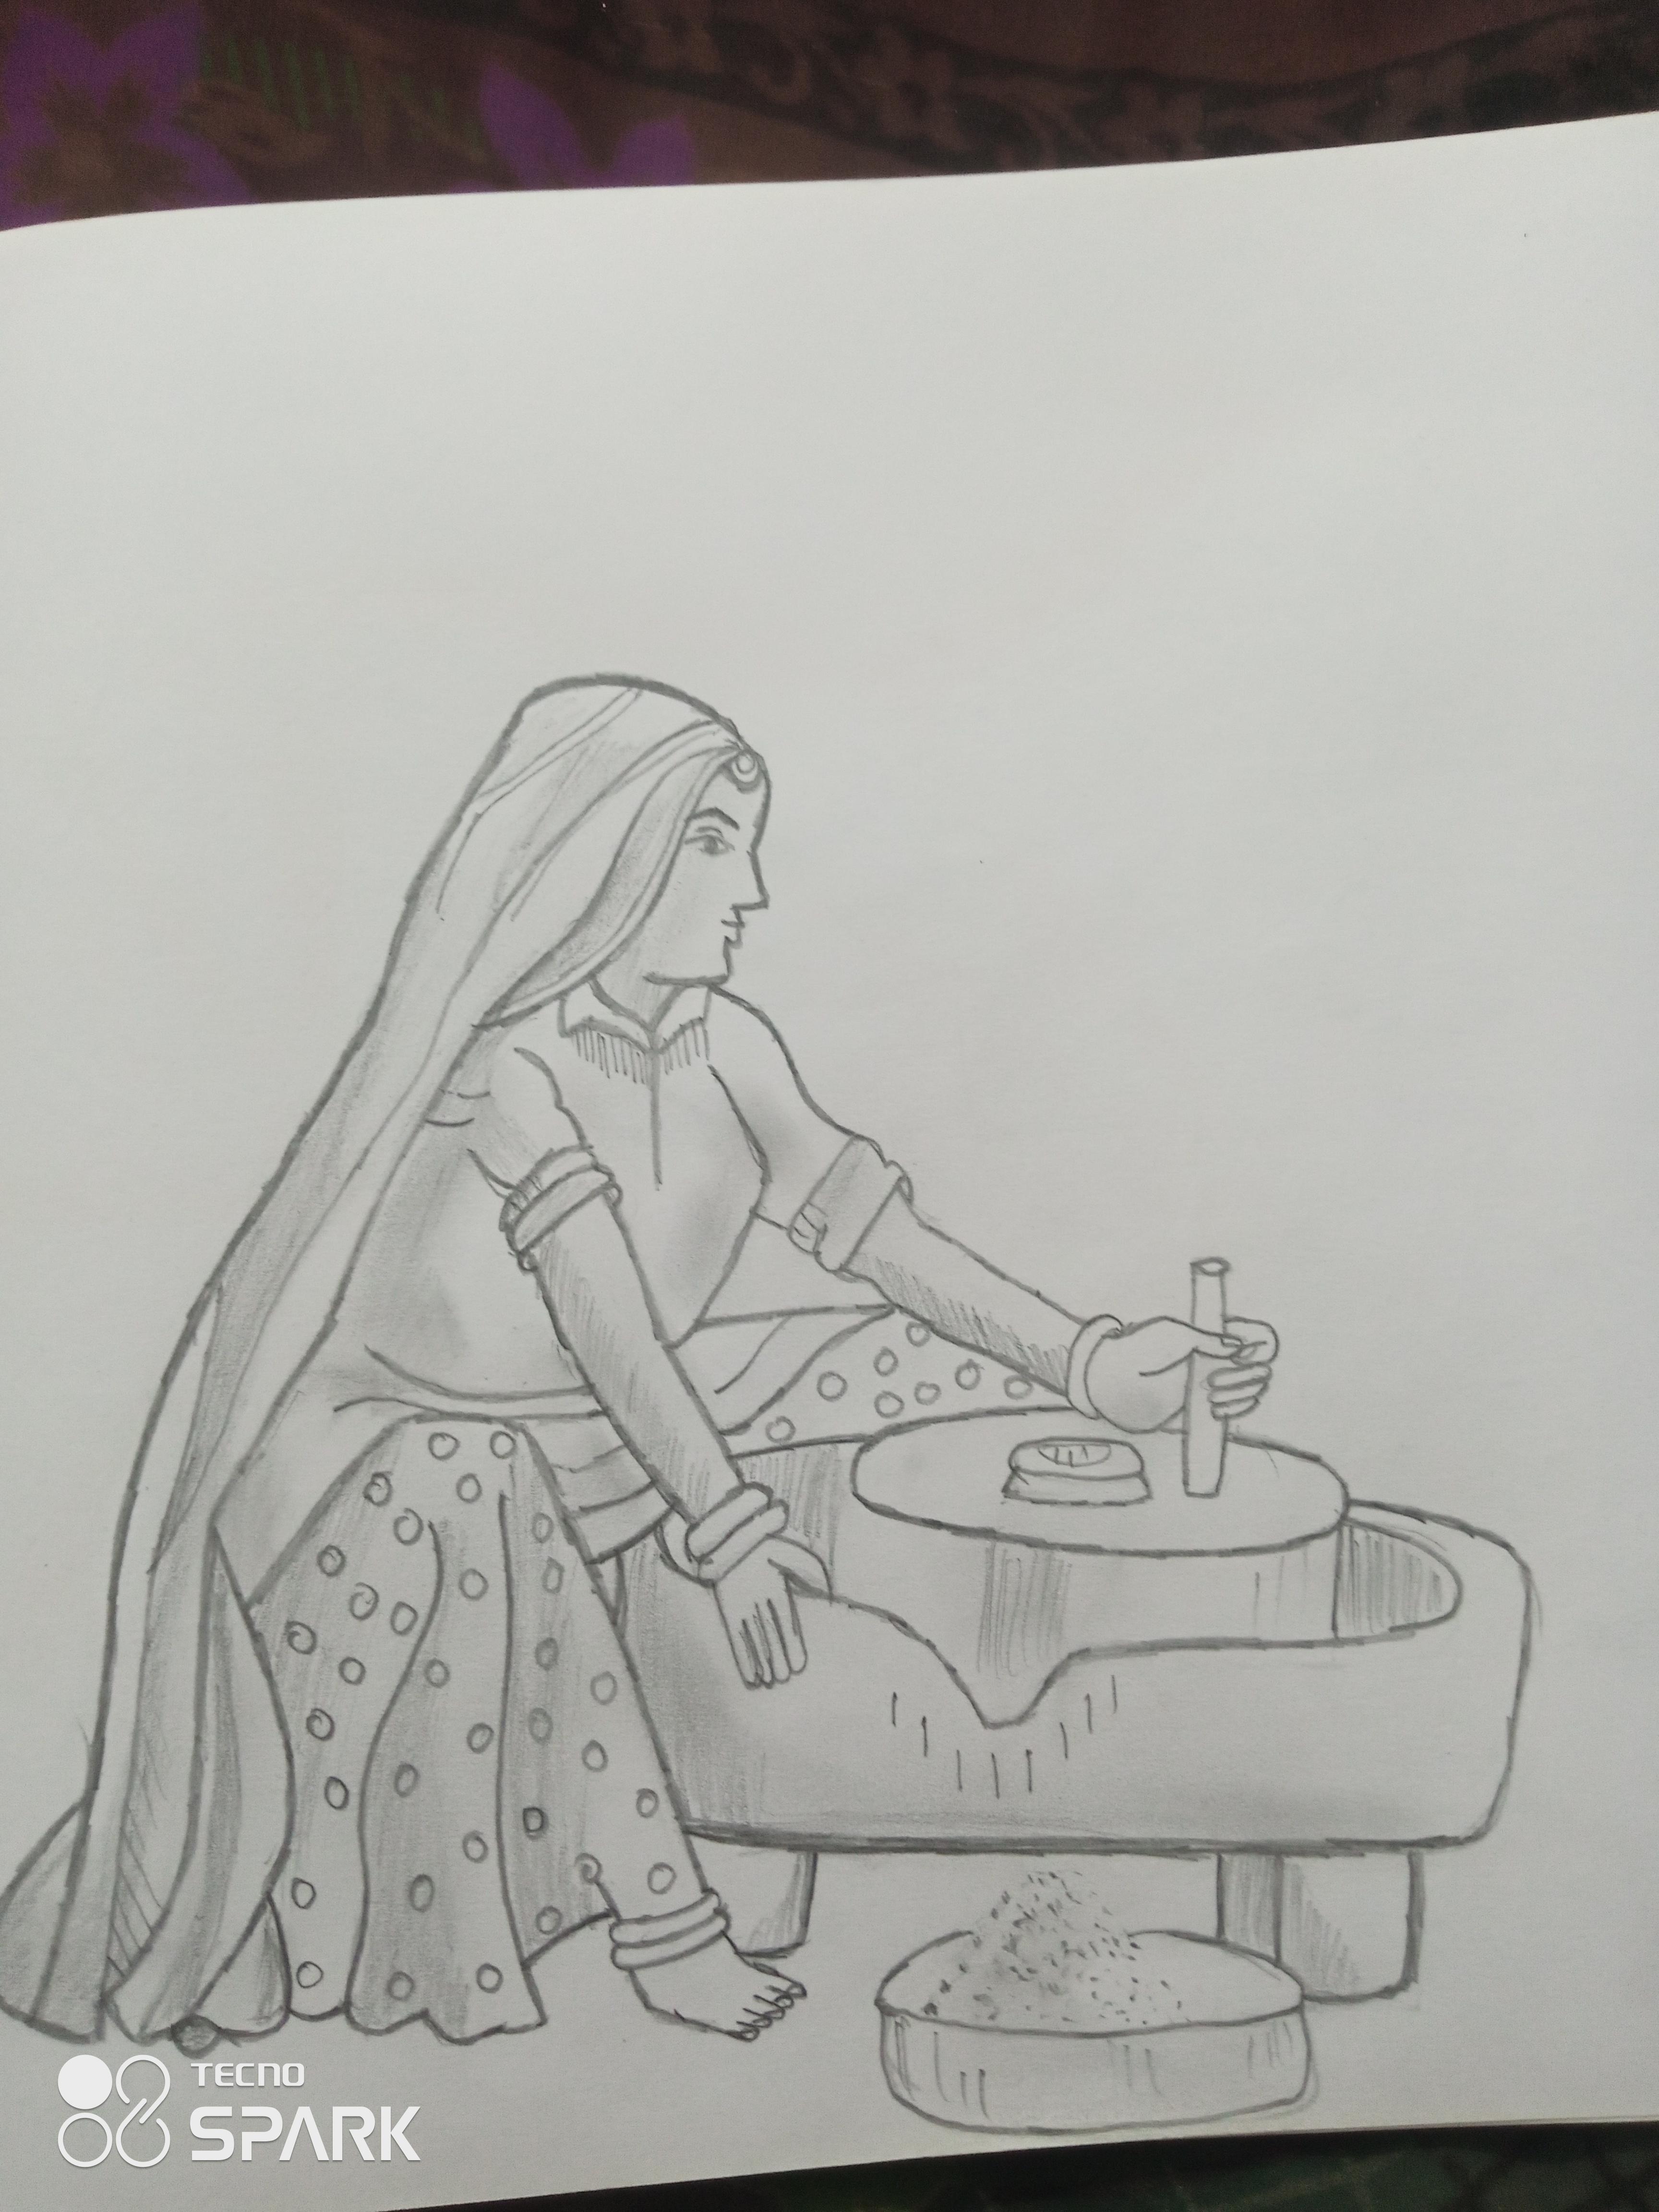 CreationS  The Essene of Arts A Morning Thought  Sketch of Two Panihari